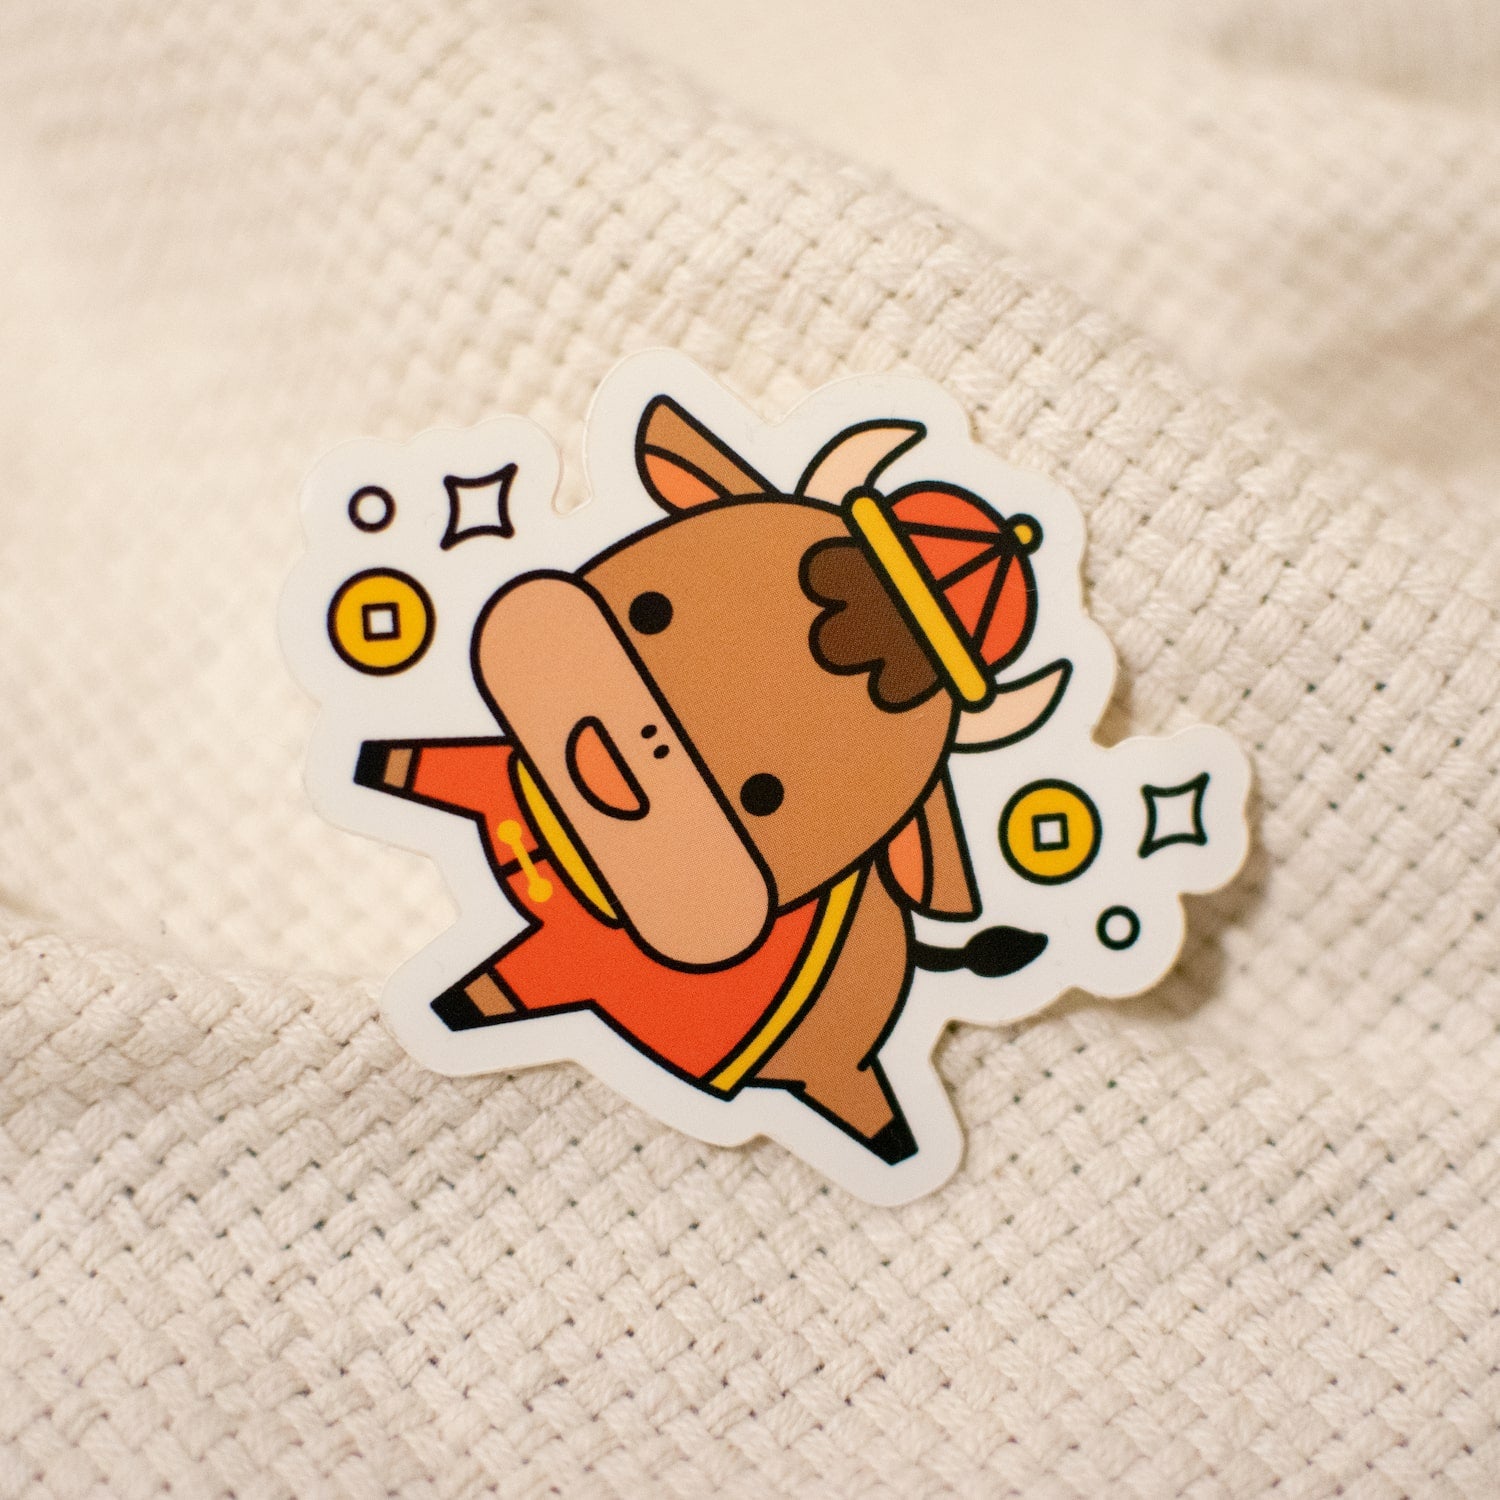 Year of the Ox Vinyl Sticker - Ni De Mama Chinese Clothing